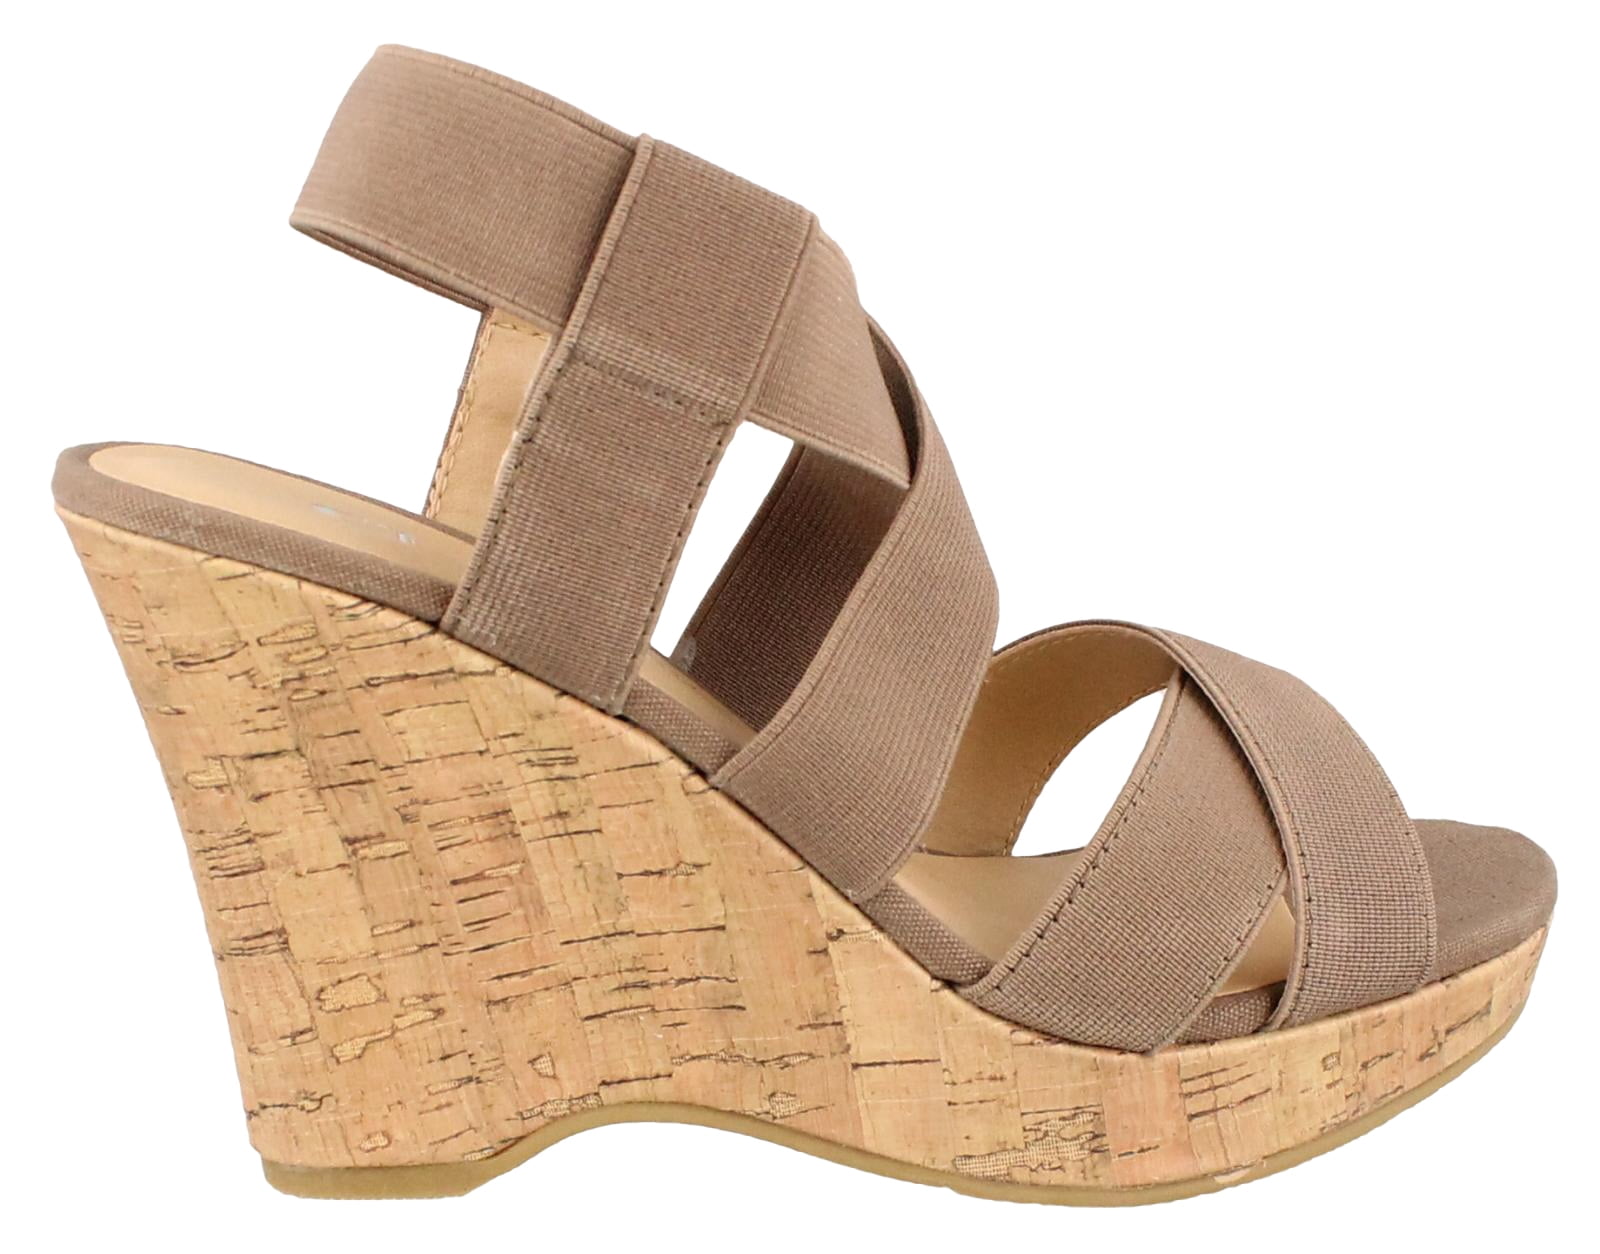 cl by laundry bliss wedge sandal